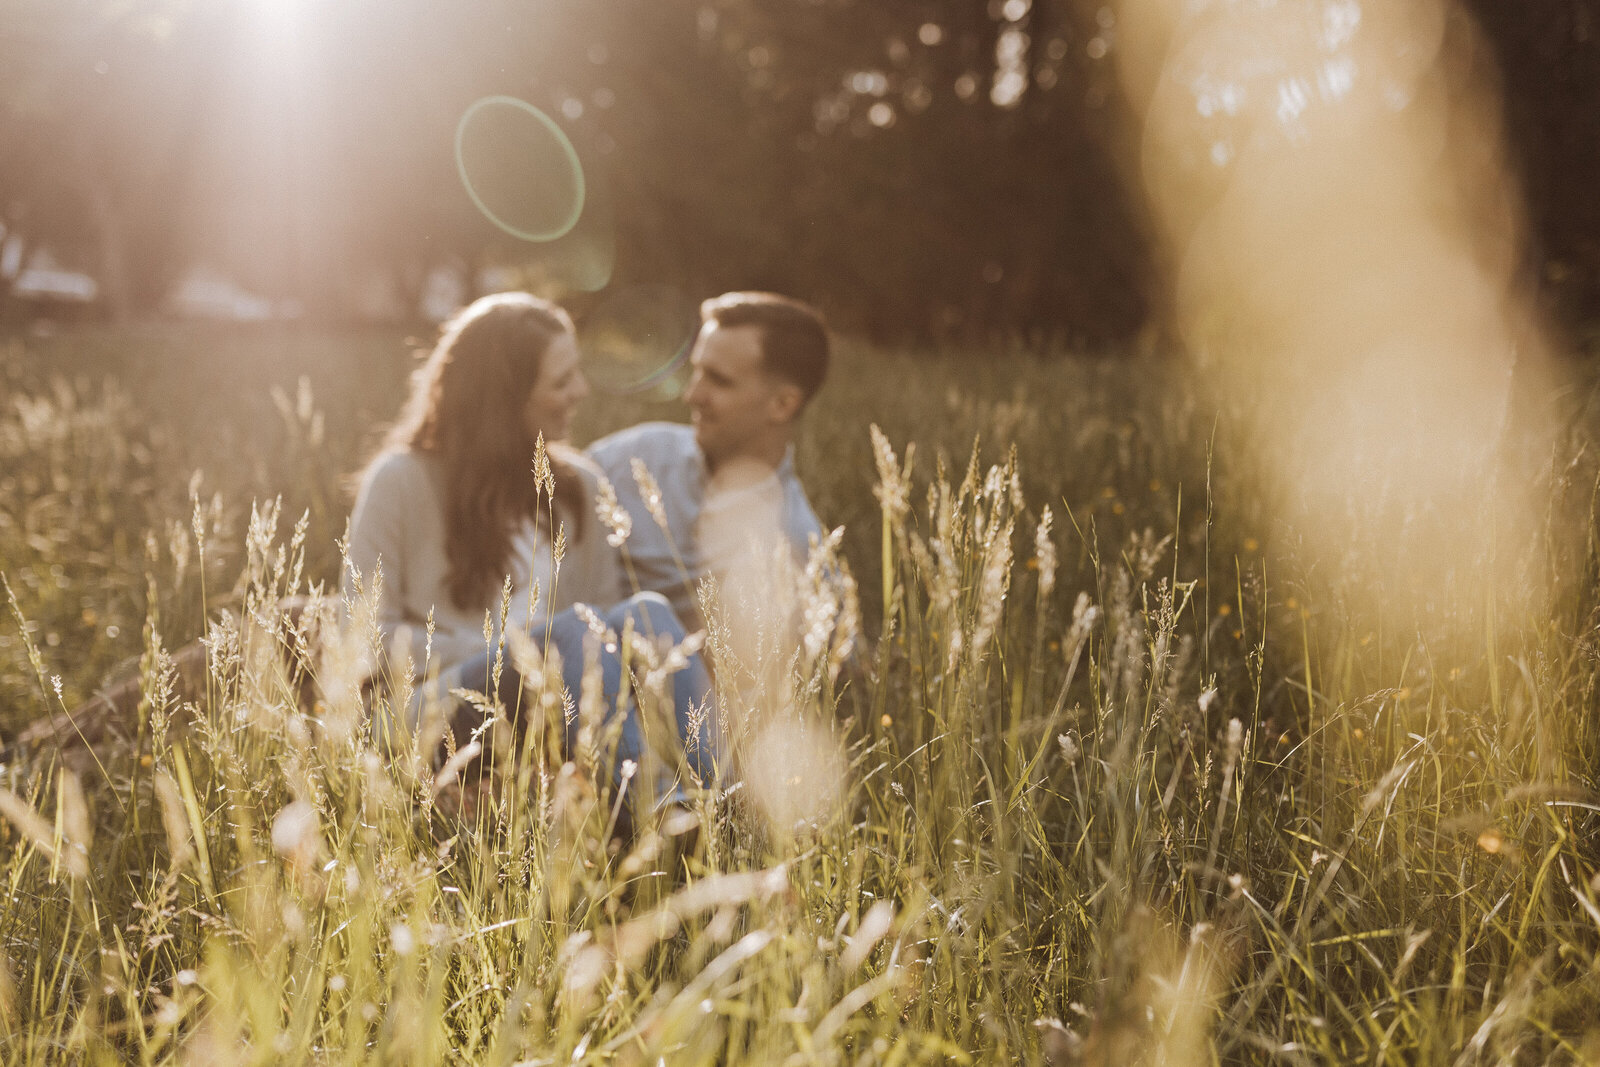 A man and woman sit together in a sunny field